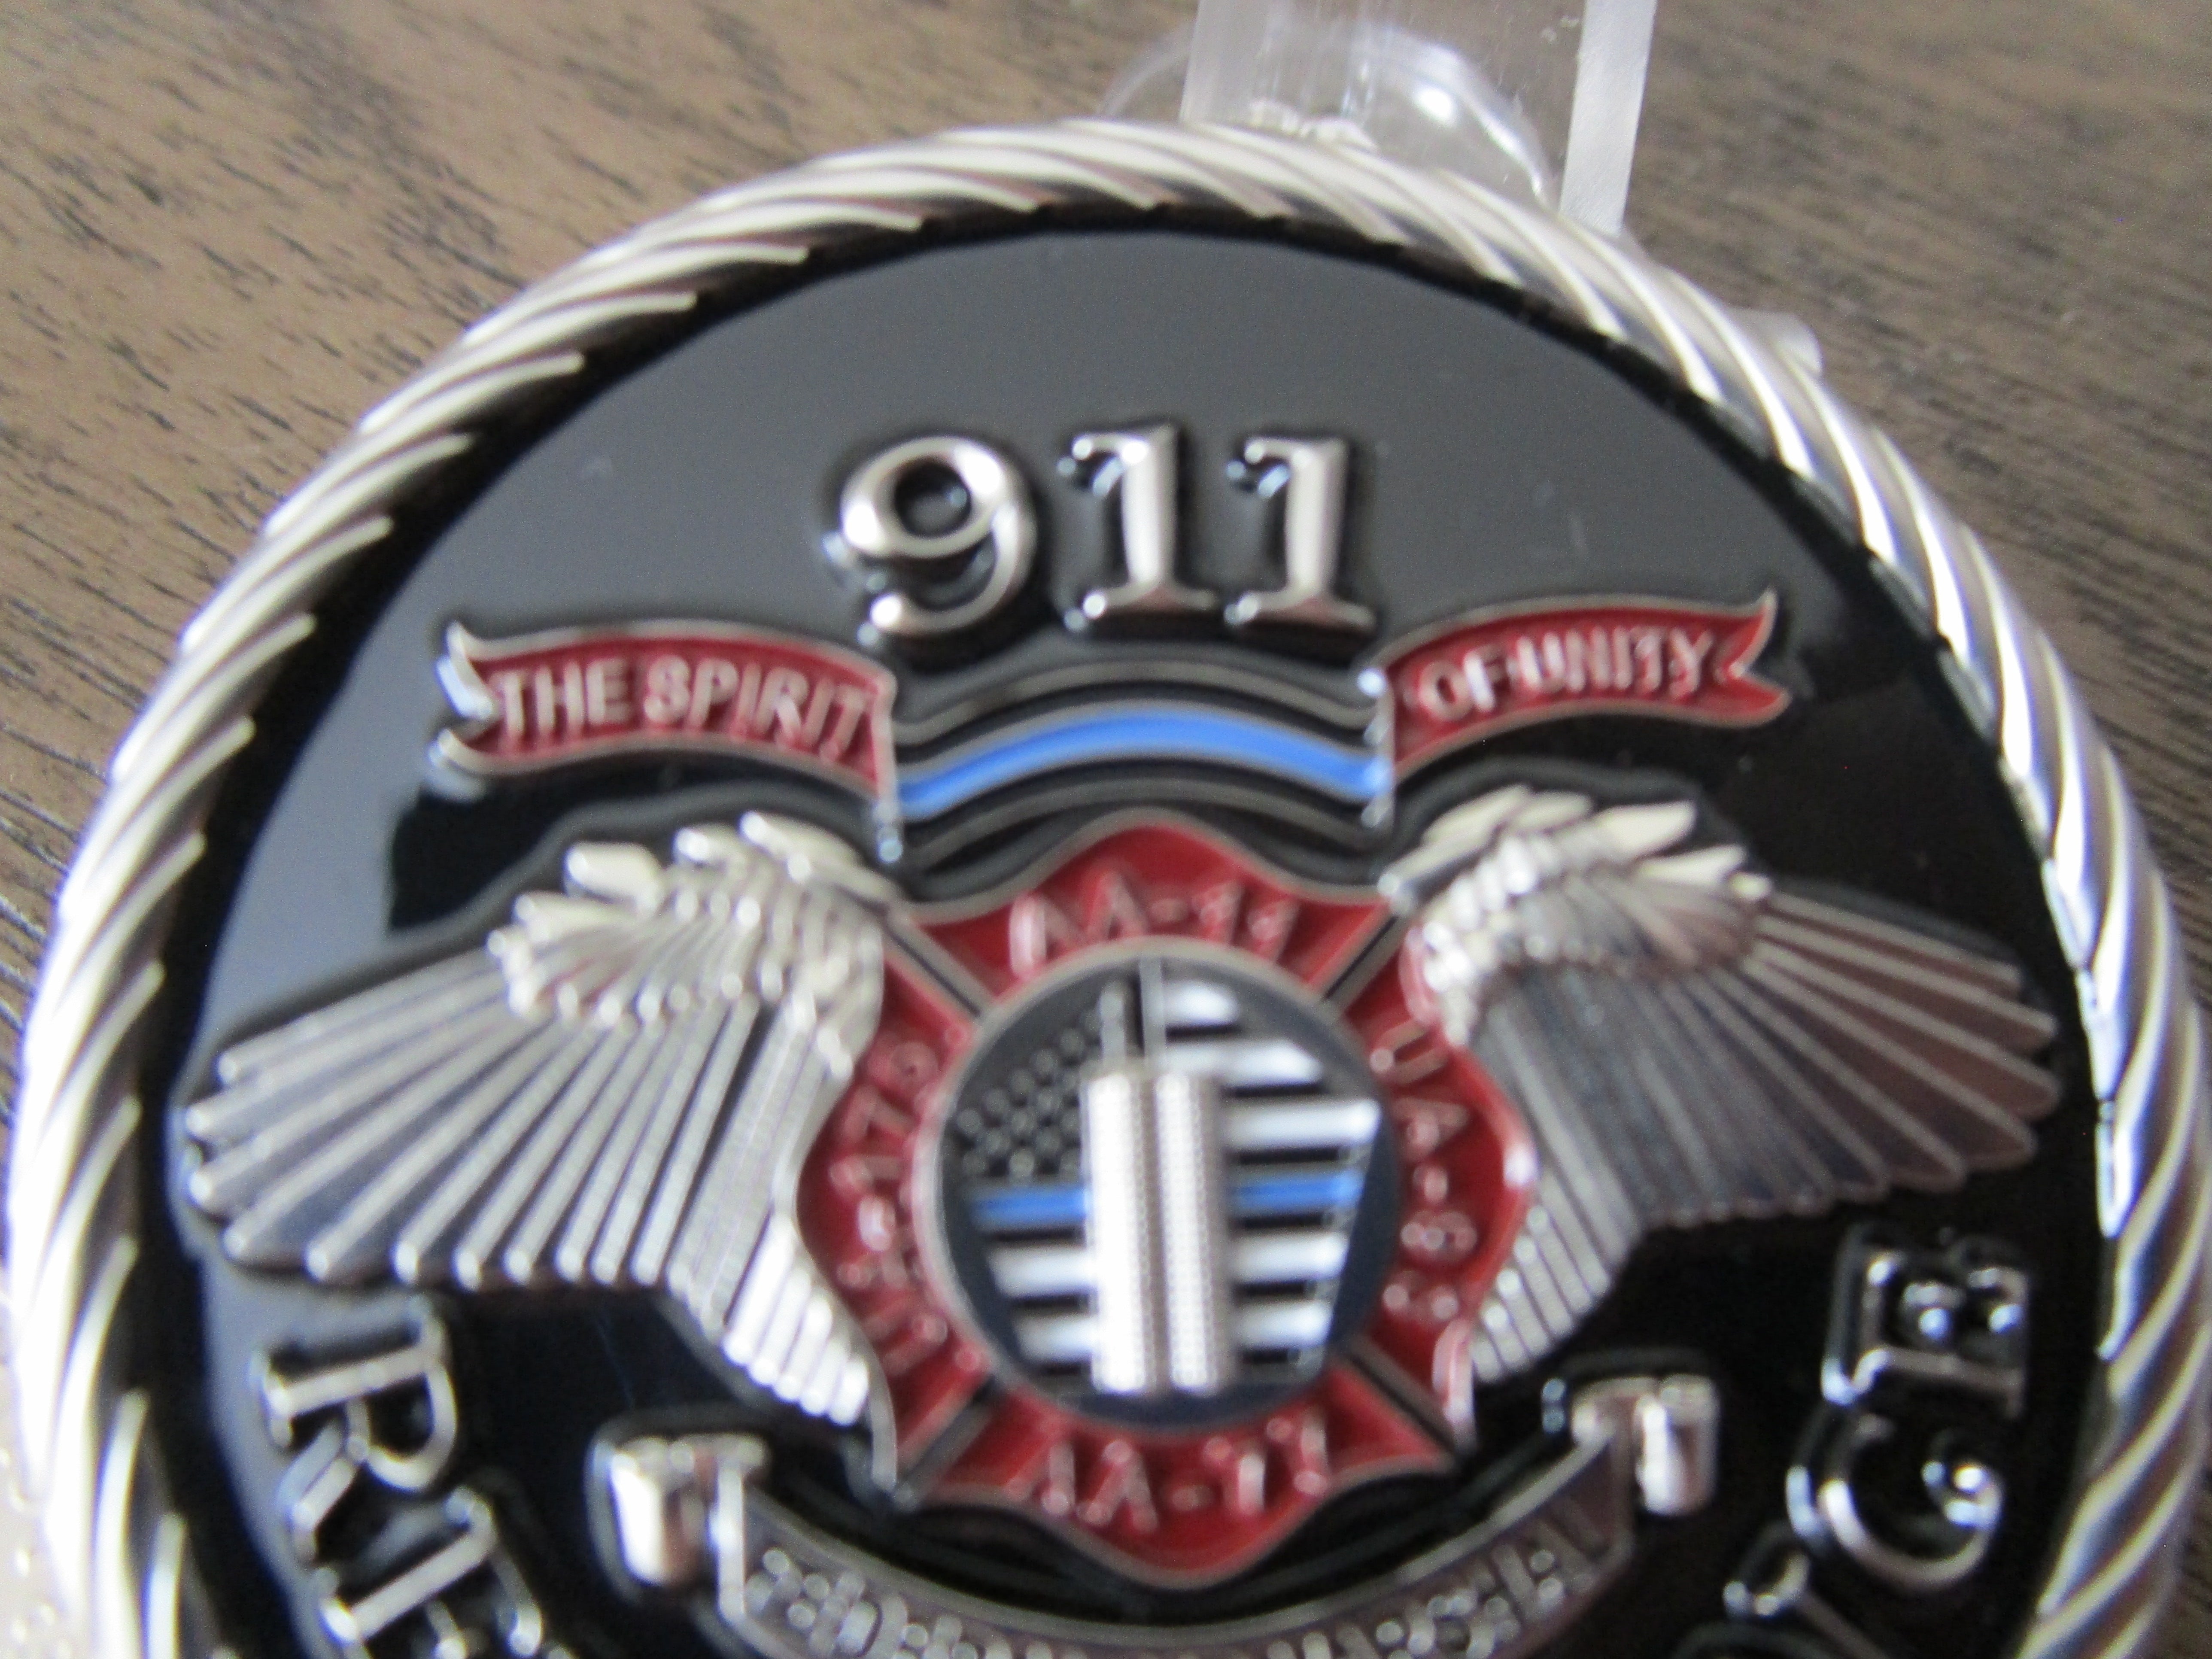 Federal Air Marshal Service FAM Sept. 11th 911 Remembrance Challenge Coin